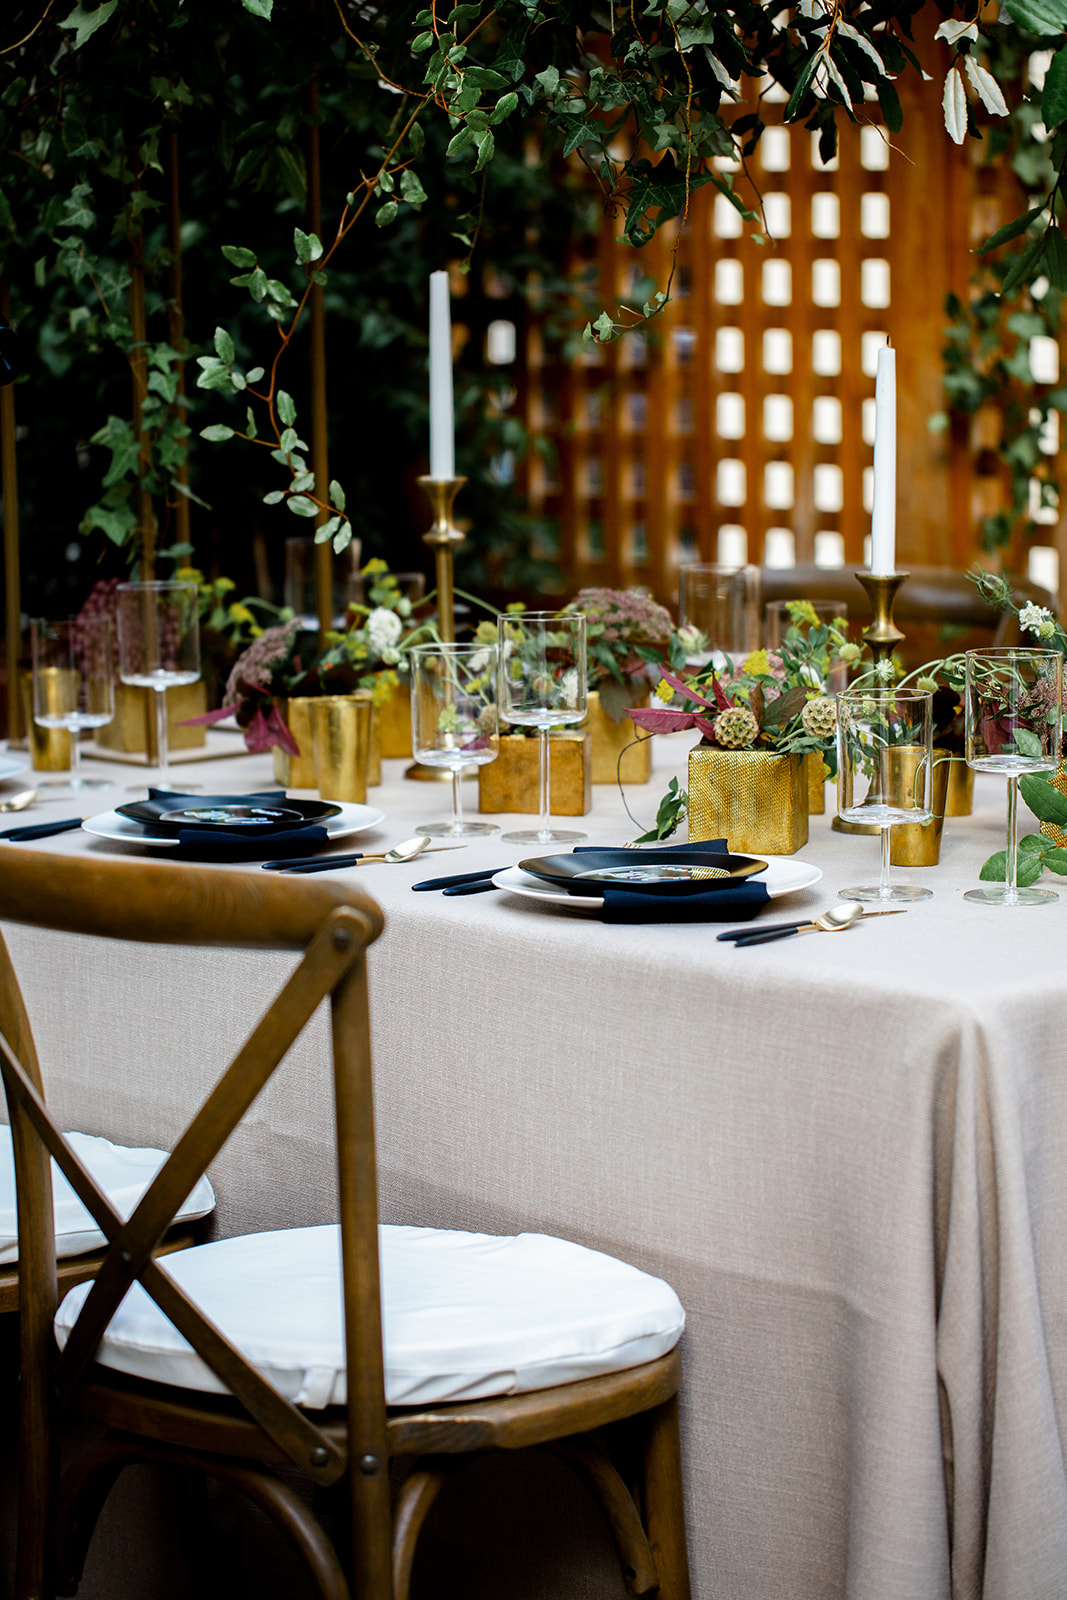 7 Micro Wedding Tabletop Inspirations For Backyard and Intimate Weddings - Image Property of www.j-dphoto.com